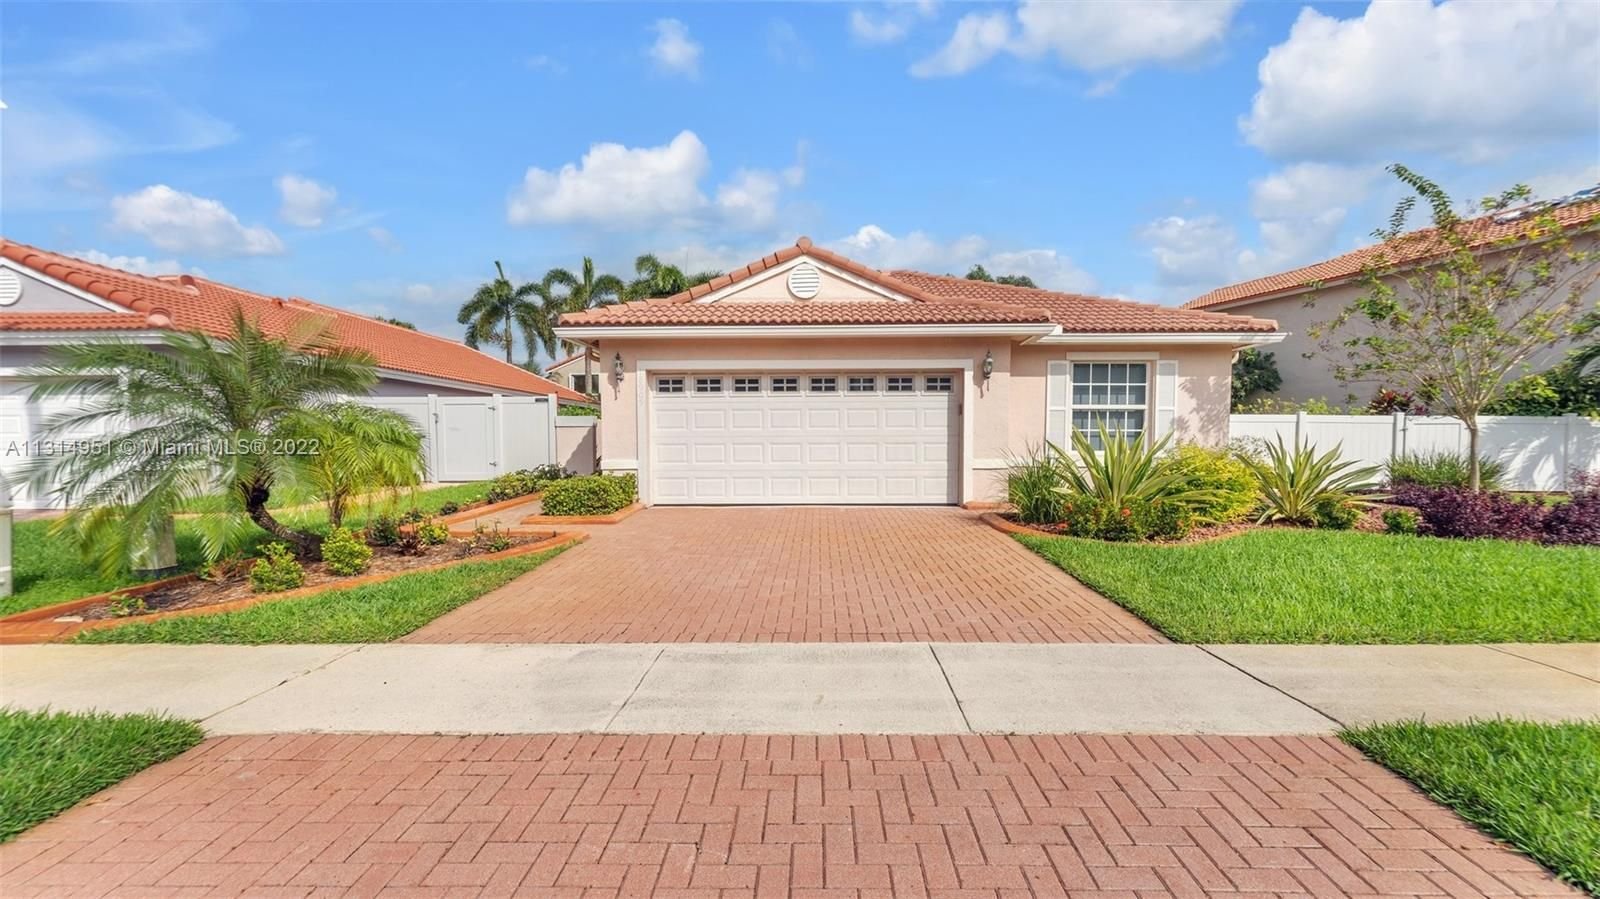 Real estate property located at 18905 13th St, Broward County, Pembroke Pines, FL